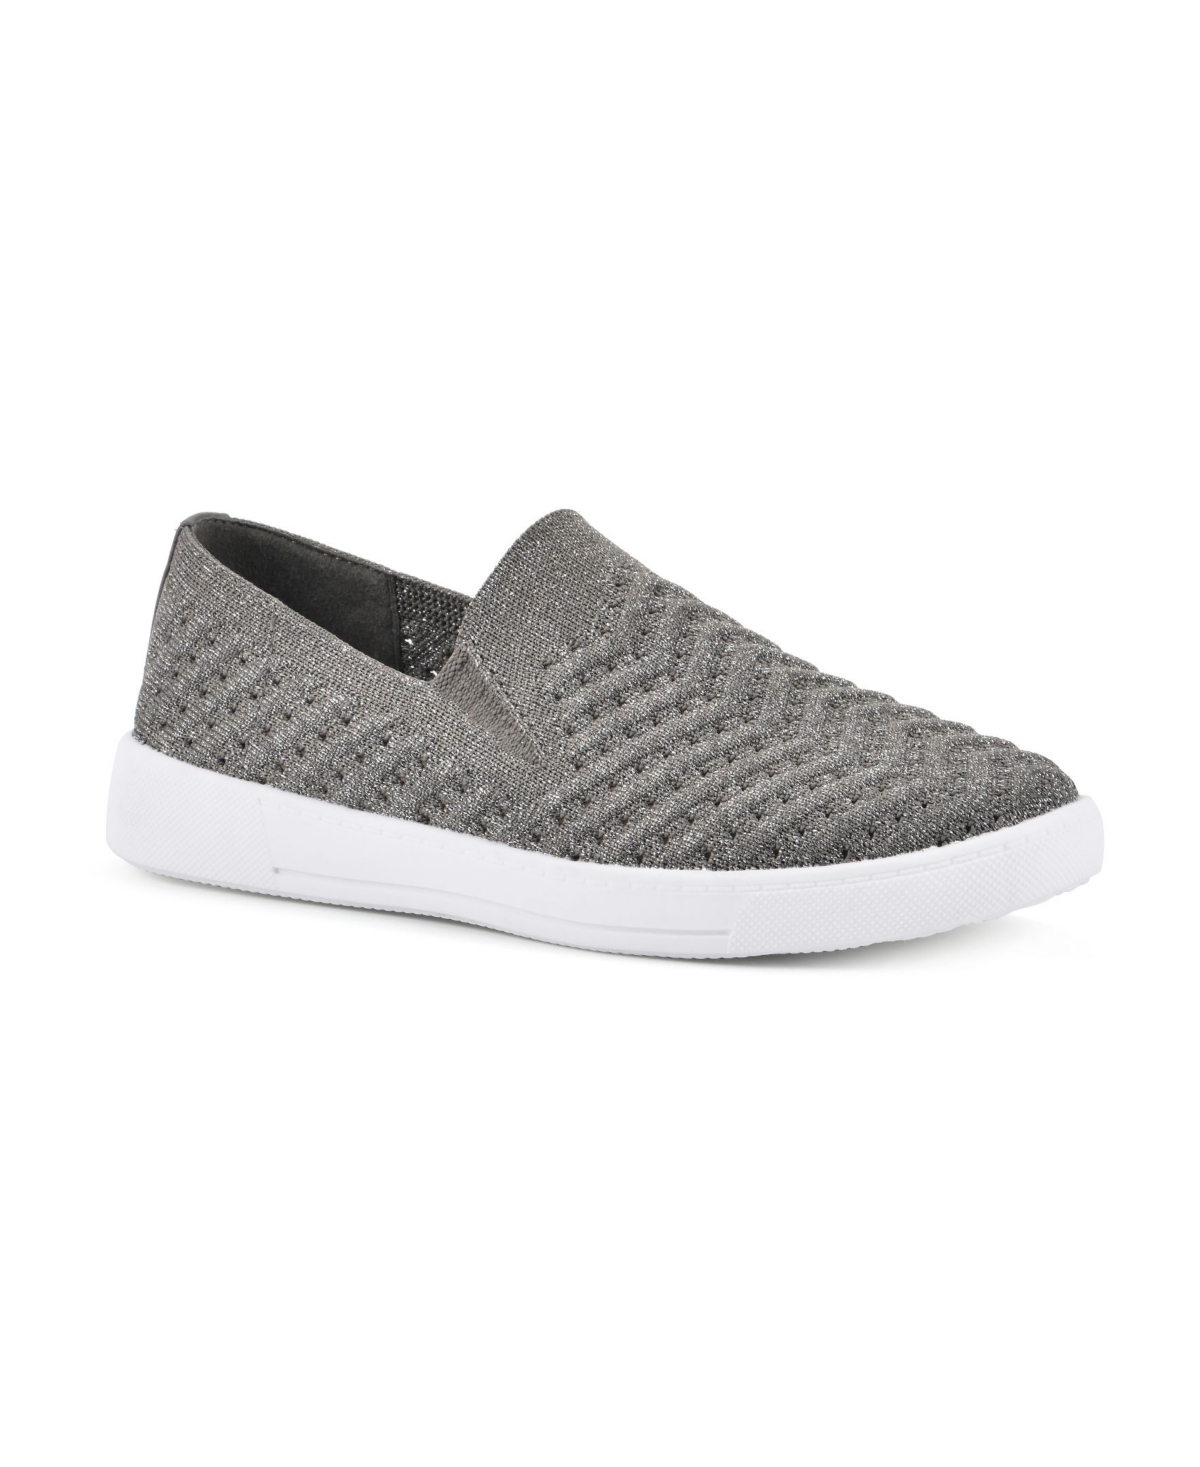 Women's Courage Slip On Sneakers - White, Fabric